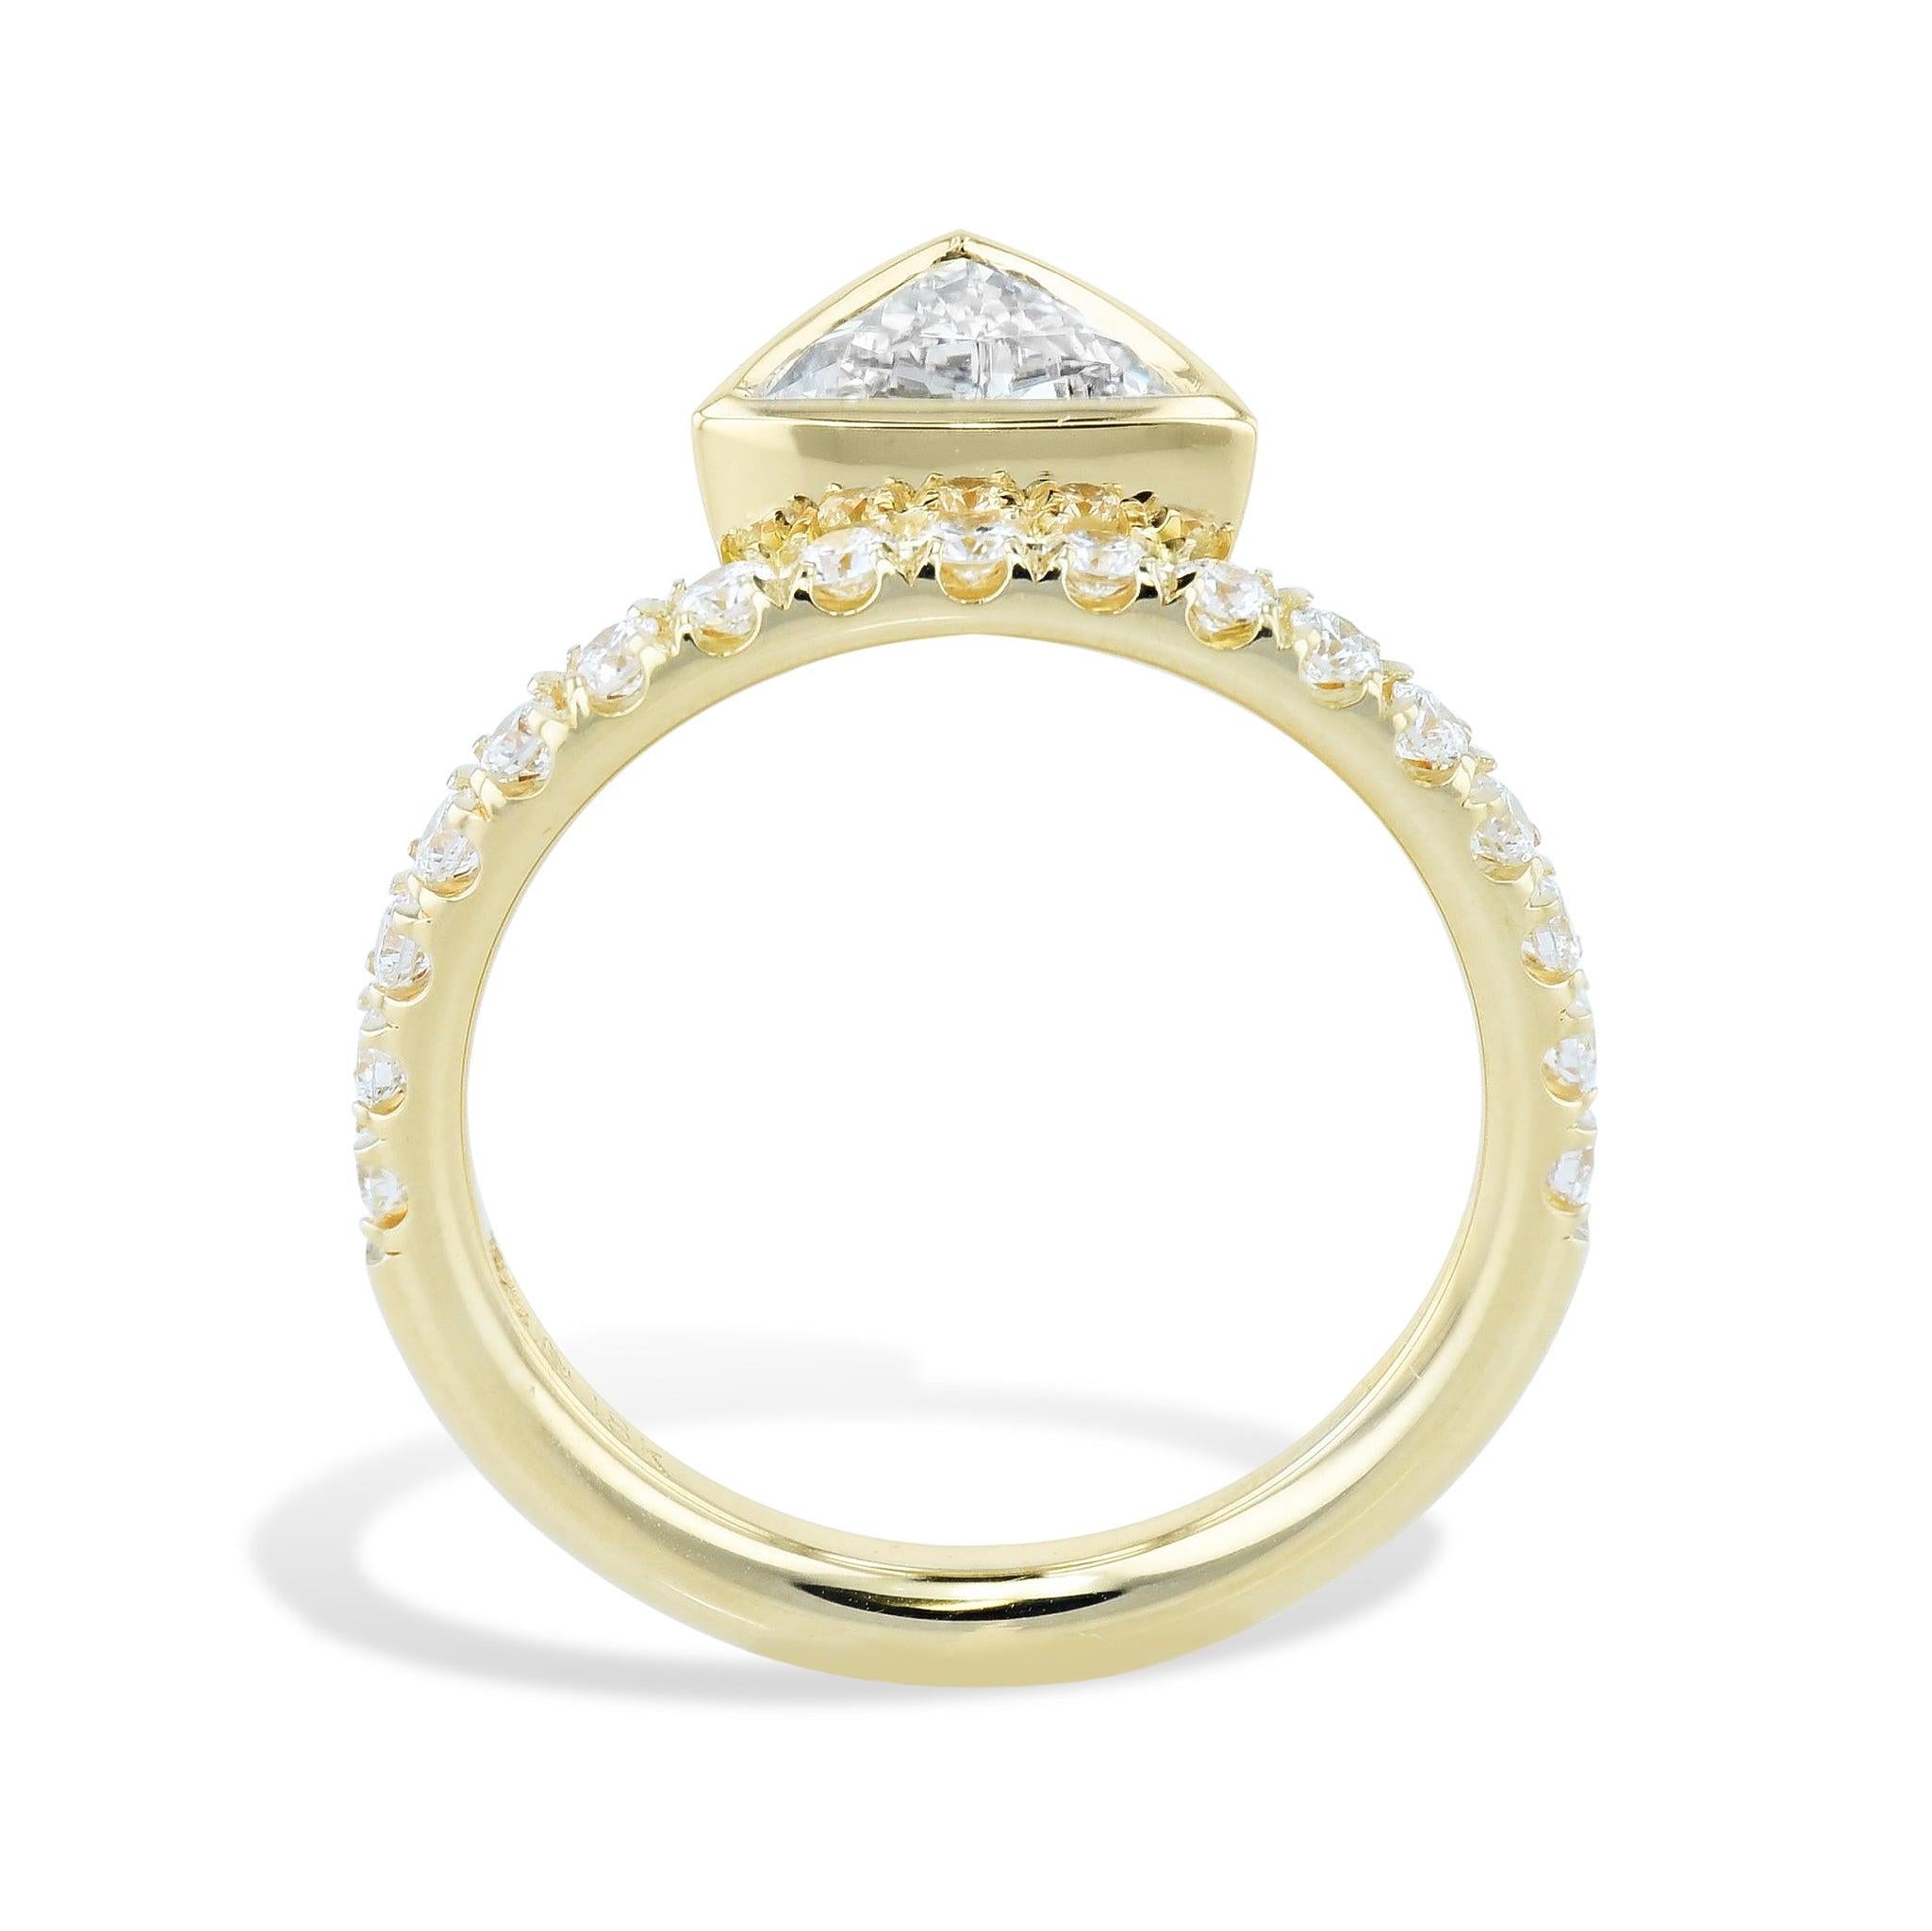 This is an exquisite 18kt Yellow gold Trillion Bezel Set Diamond with Diamond Band.  
It will captivate you with its bright-white sparkle. 
It has a one carat Center Diamond that is H in color and VS1 in clarity. 
The diamond is trillion cut and is